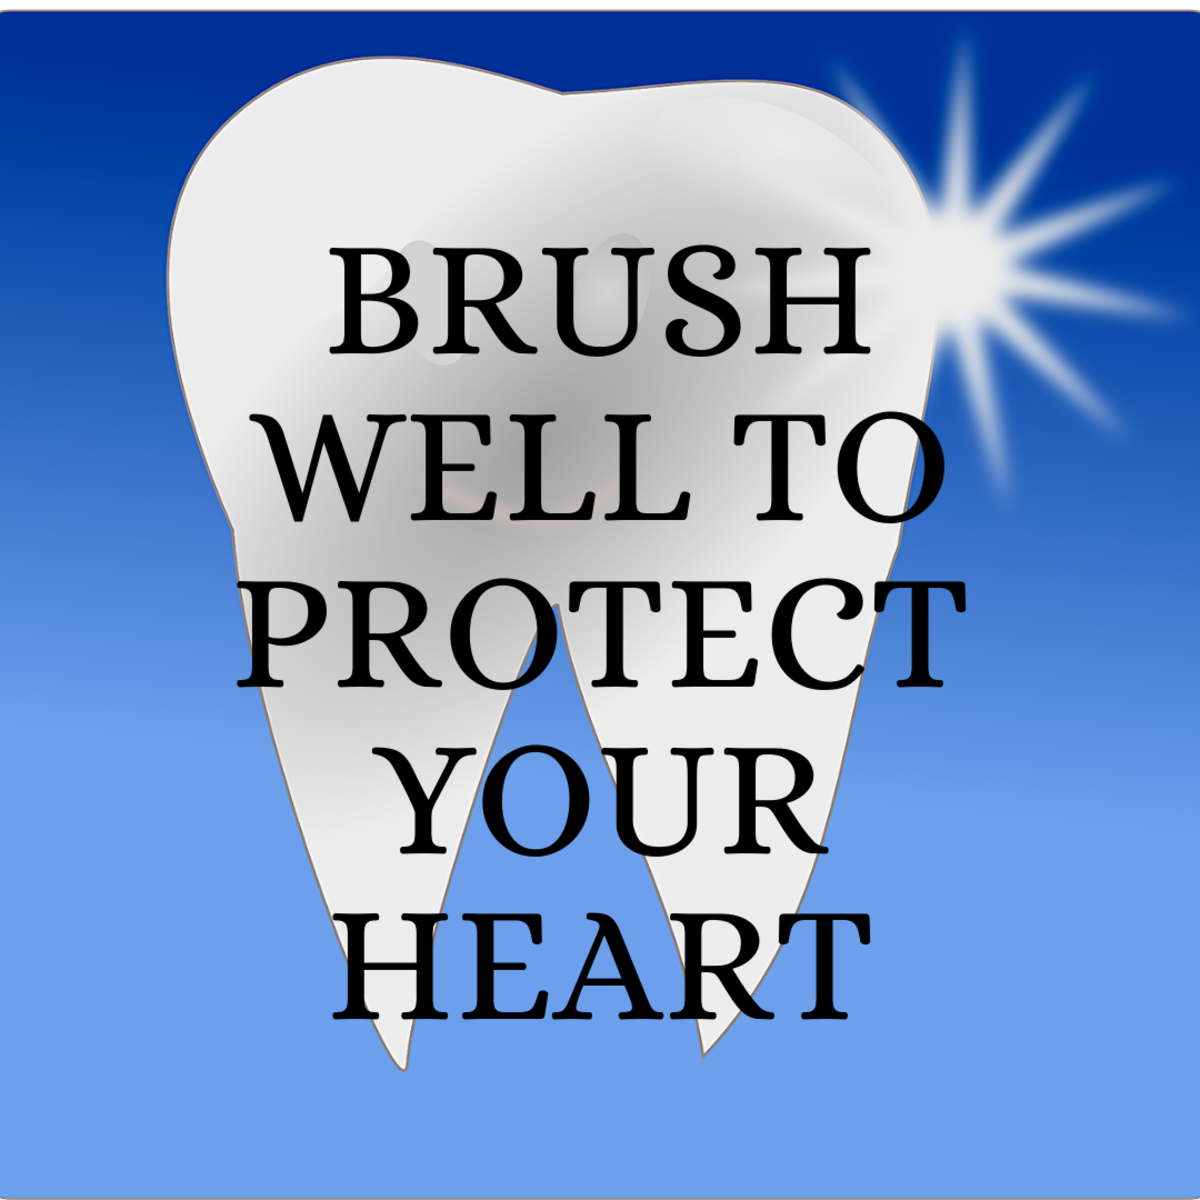 How Does Brushing Your Teeth Twice A Day Saves Your Heart?